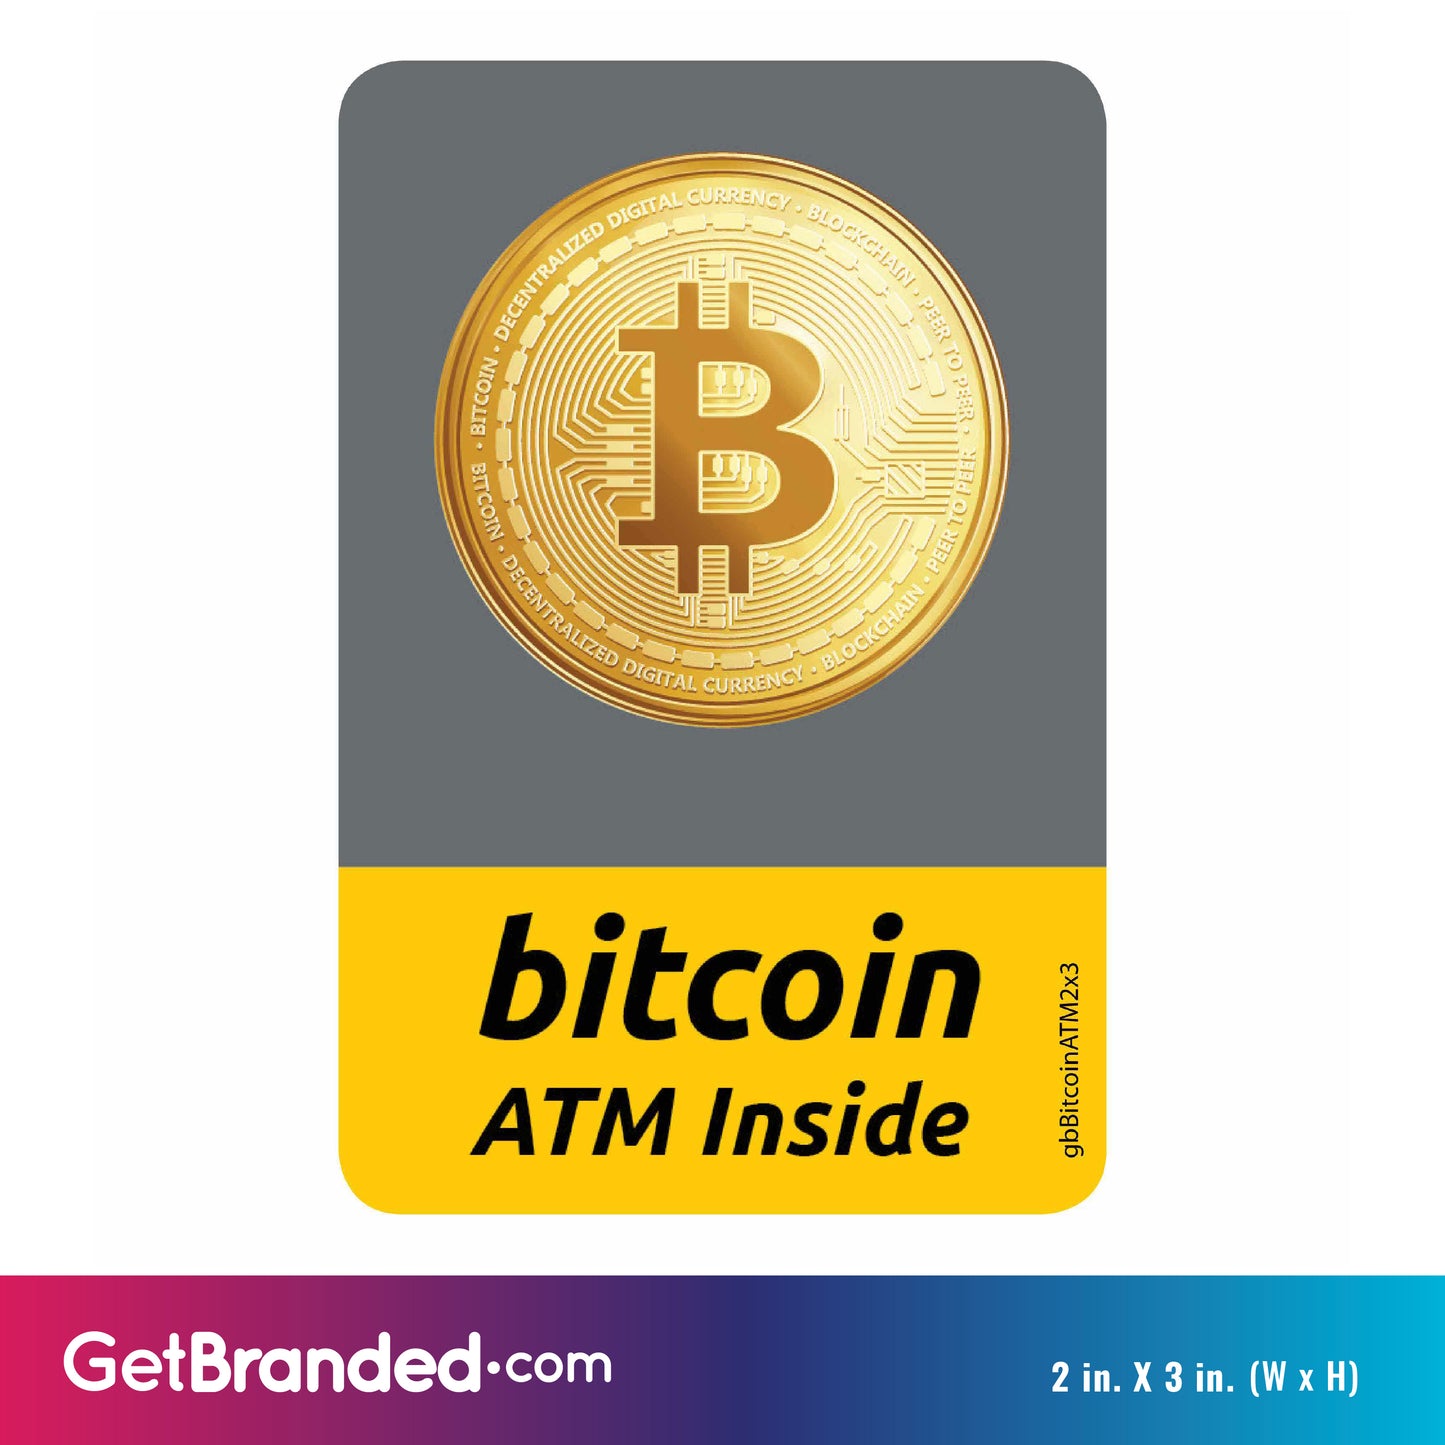 Bitcoin ATM Inside Decal - Gray/Yellow